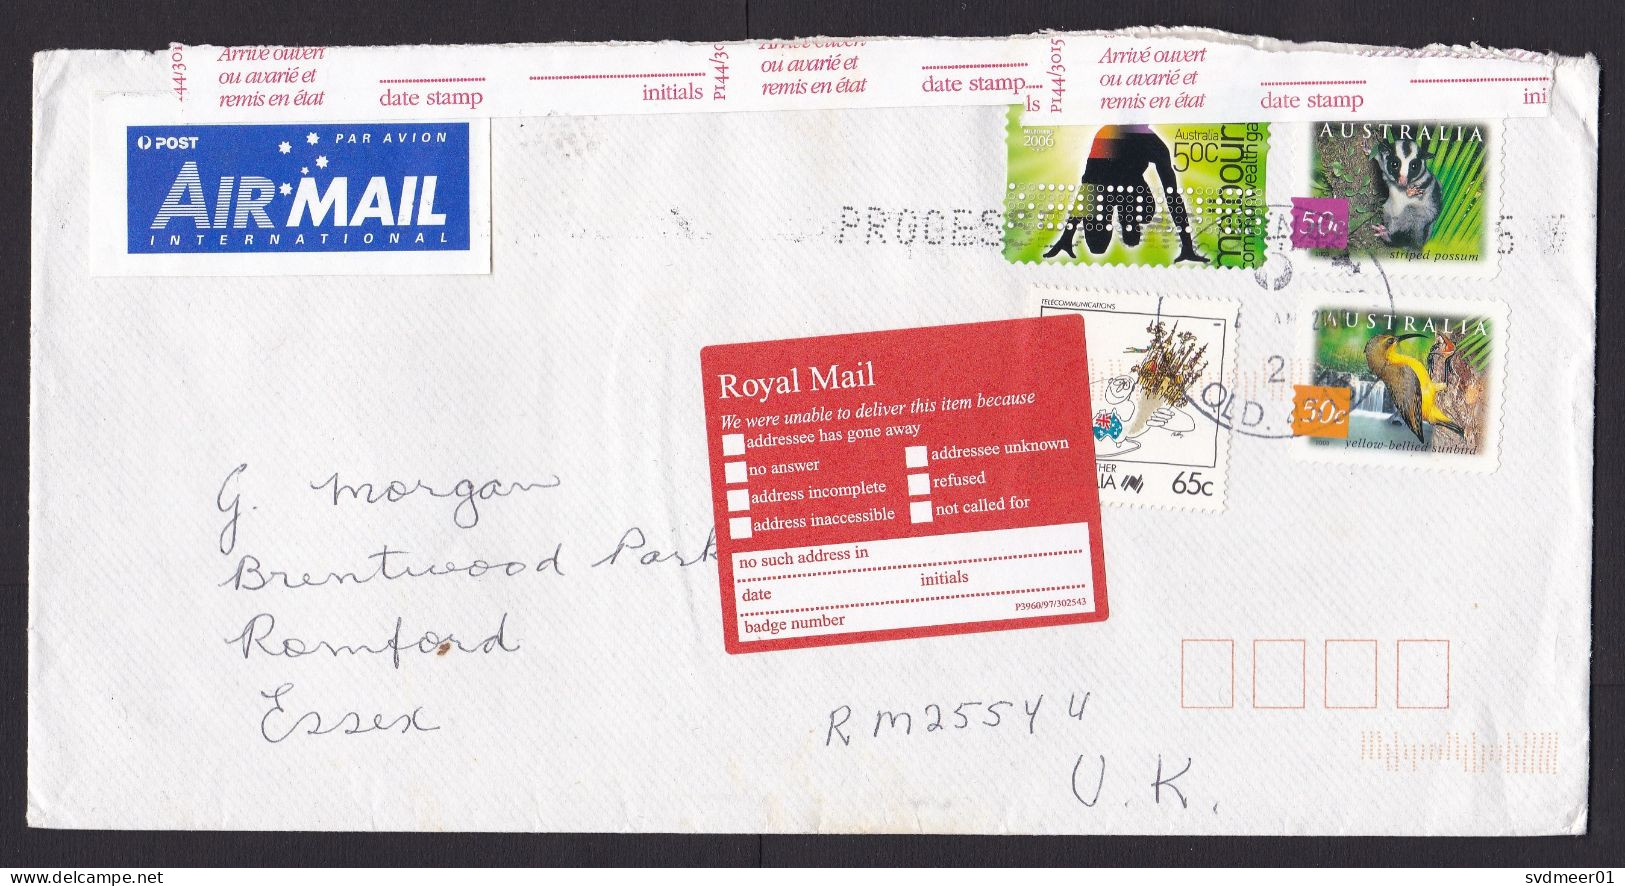 Australia: Airmail Cover To UK, 4 Stamps, Postal Label Found Damaged, Secured, Returned, Retour (minor Damage) - Covers & Documents